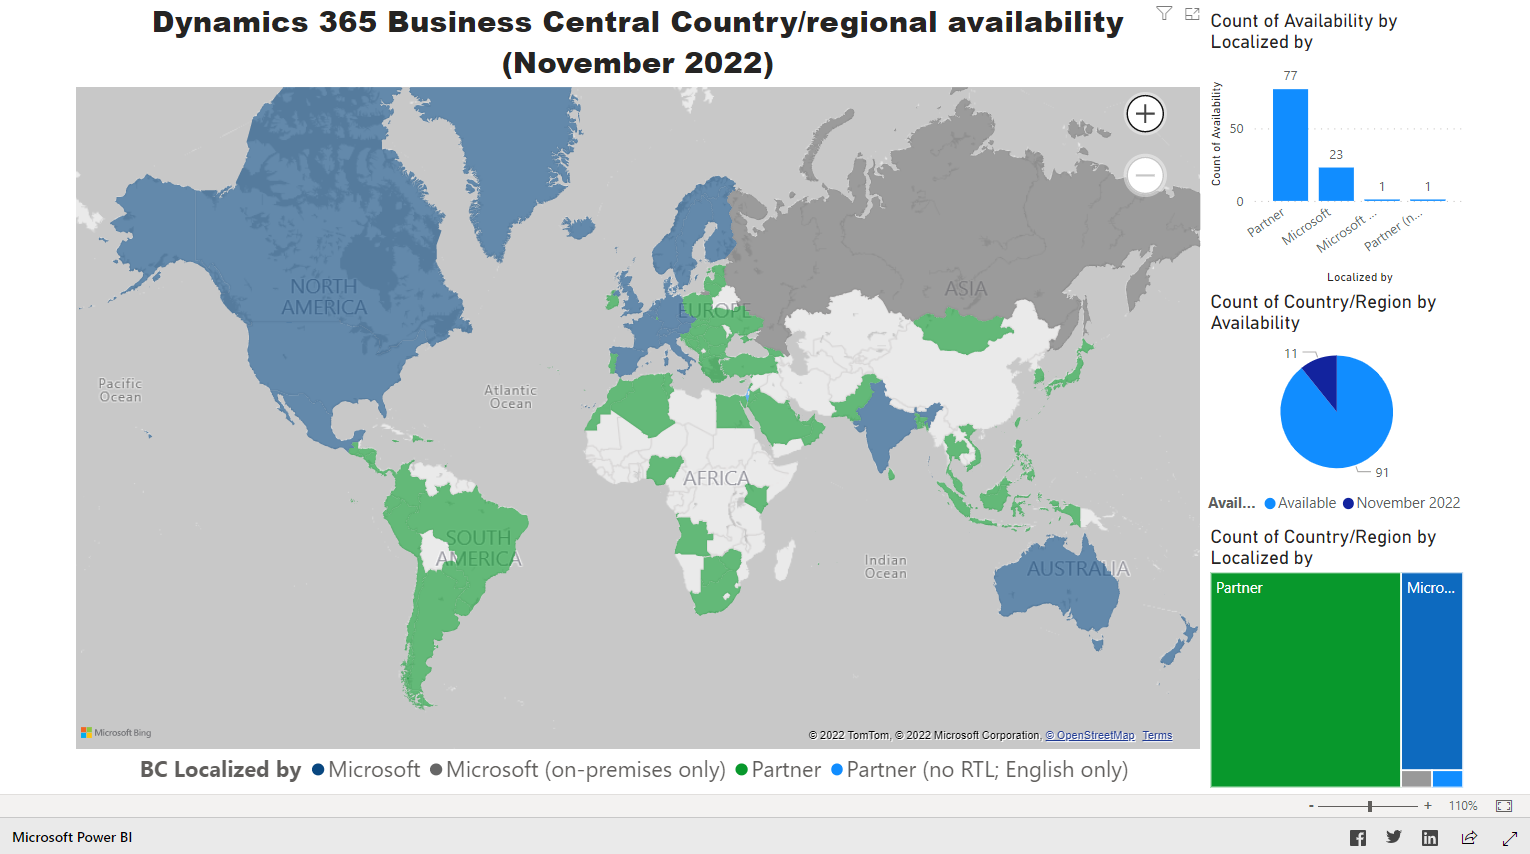 Power BI Report: Dynamics 365 Business Central Country/regional availability